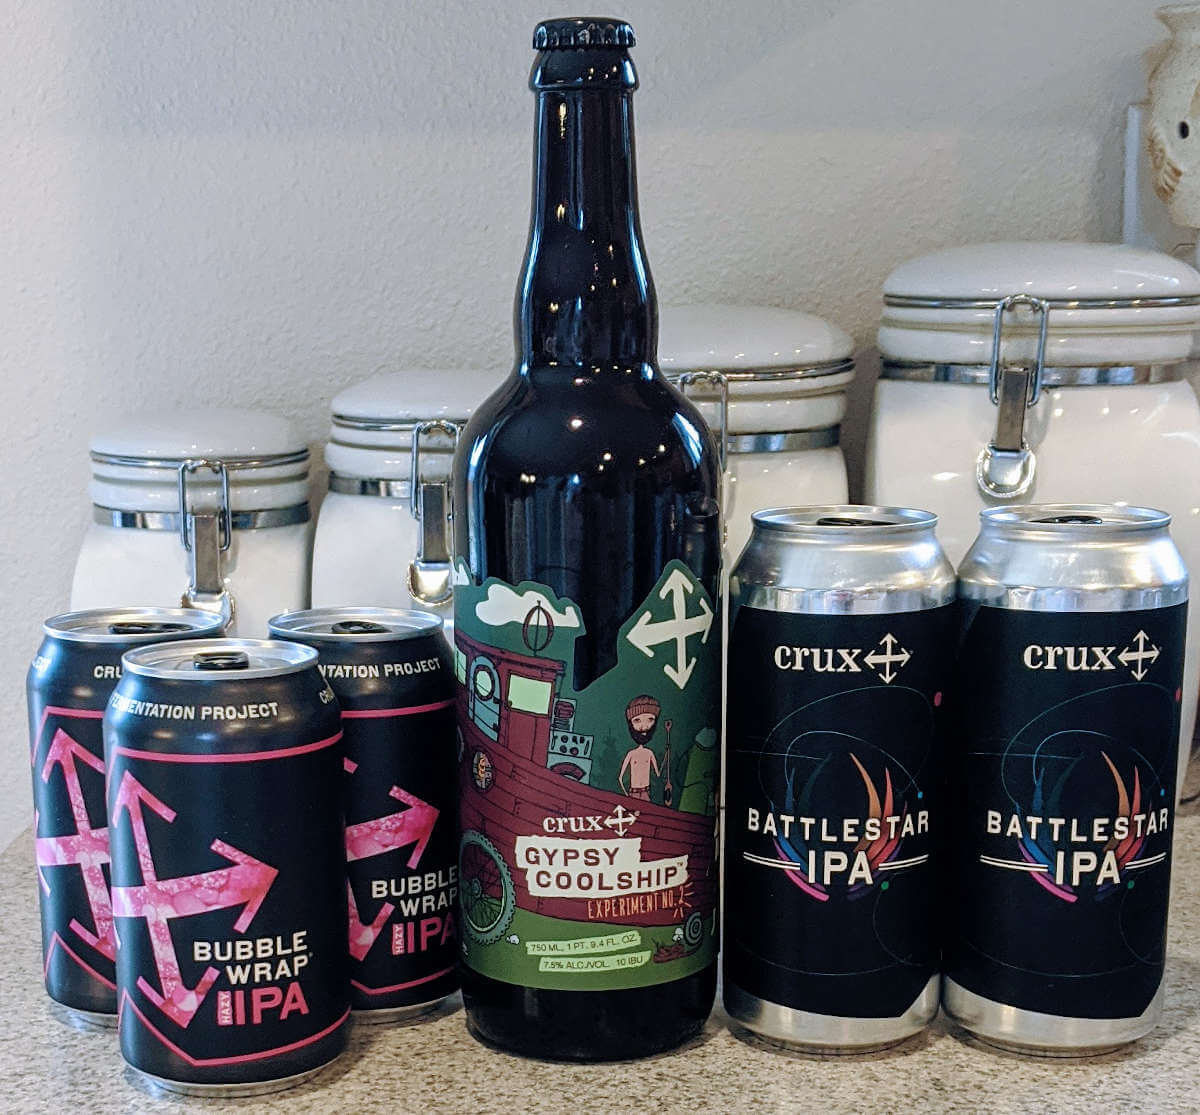 Crux Fermentation Project IPAs in cans: Bubble Wrap and Battlestar